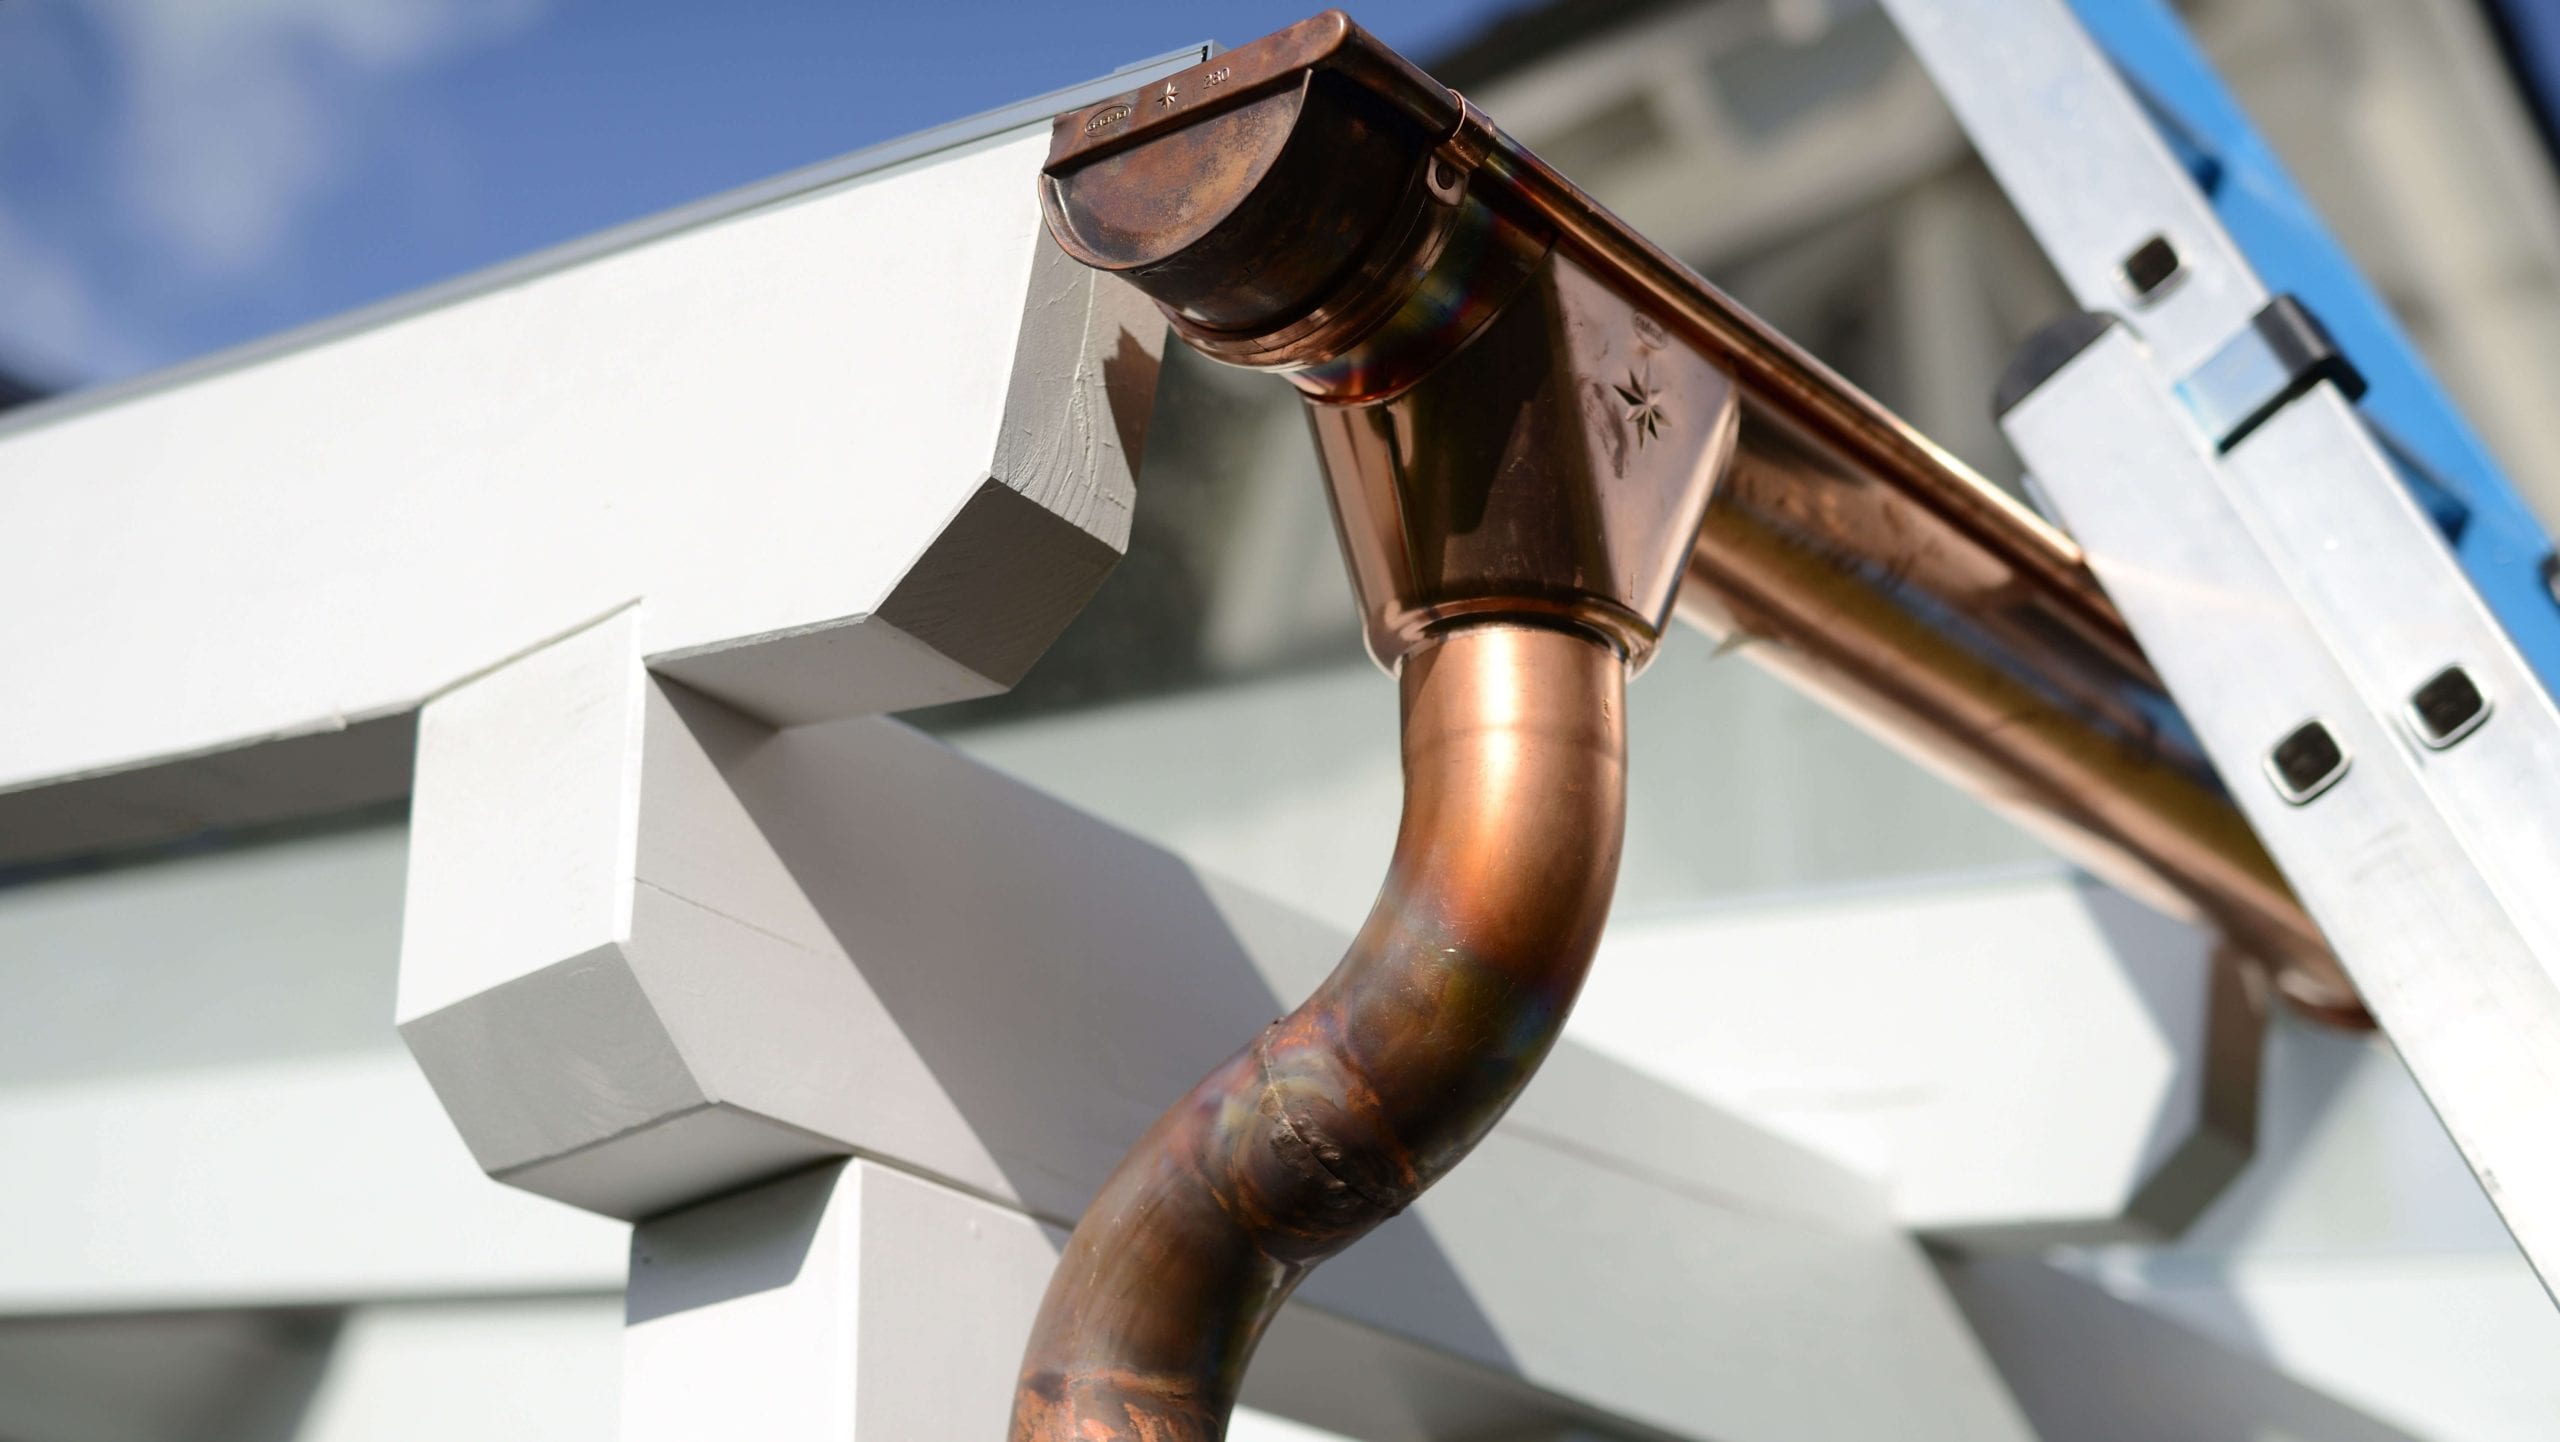 Make your property stand out with copper gutters. Contact for gutter installation in Lansing